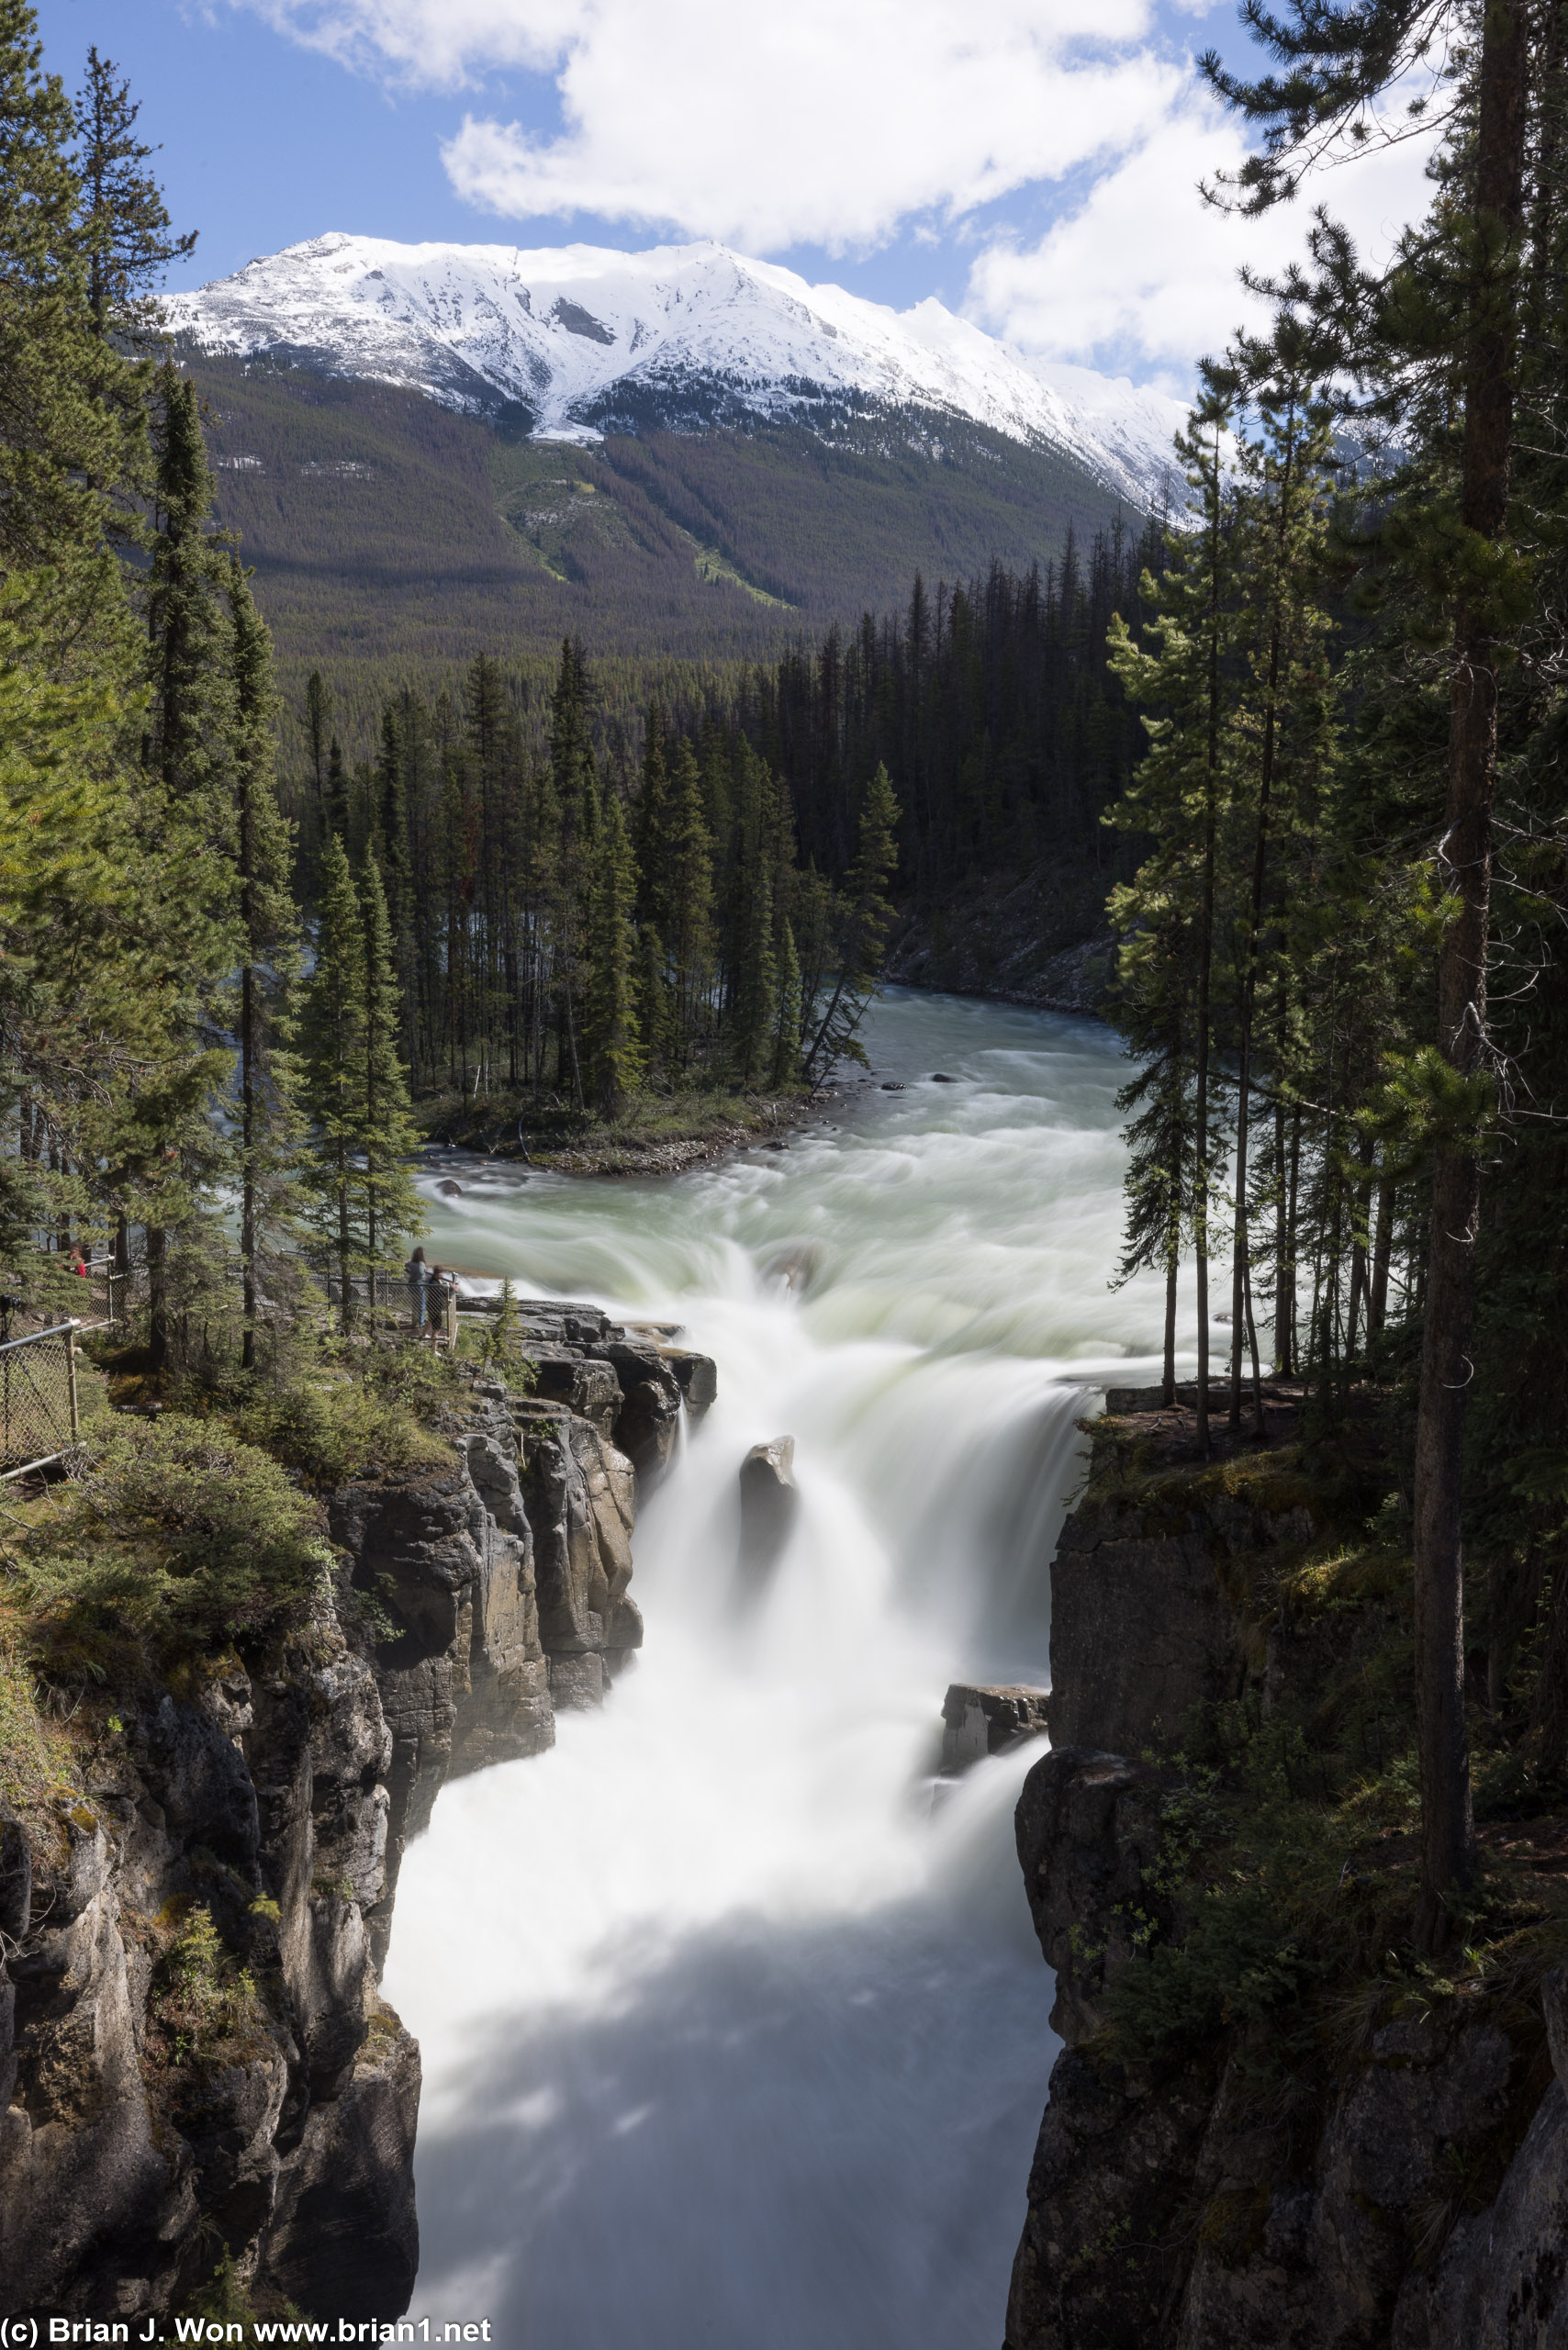 Couldn't figure out the classic angle of Sunwapta Falls.